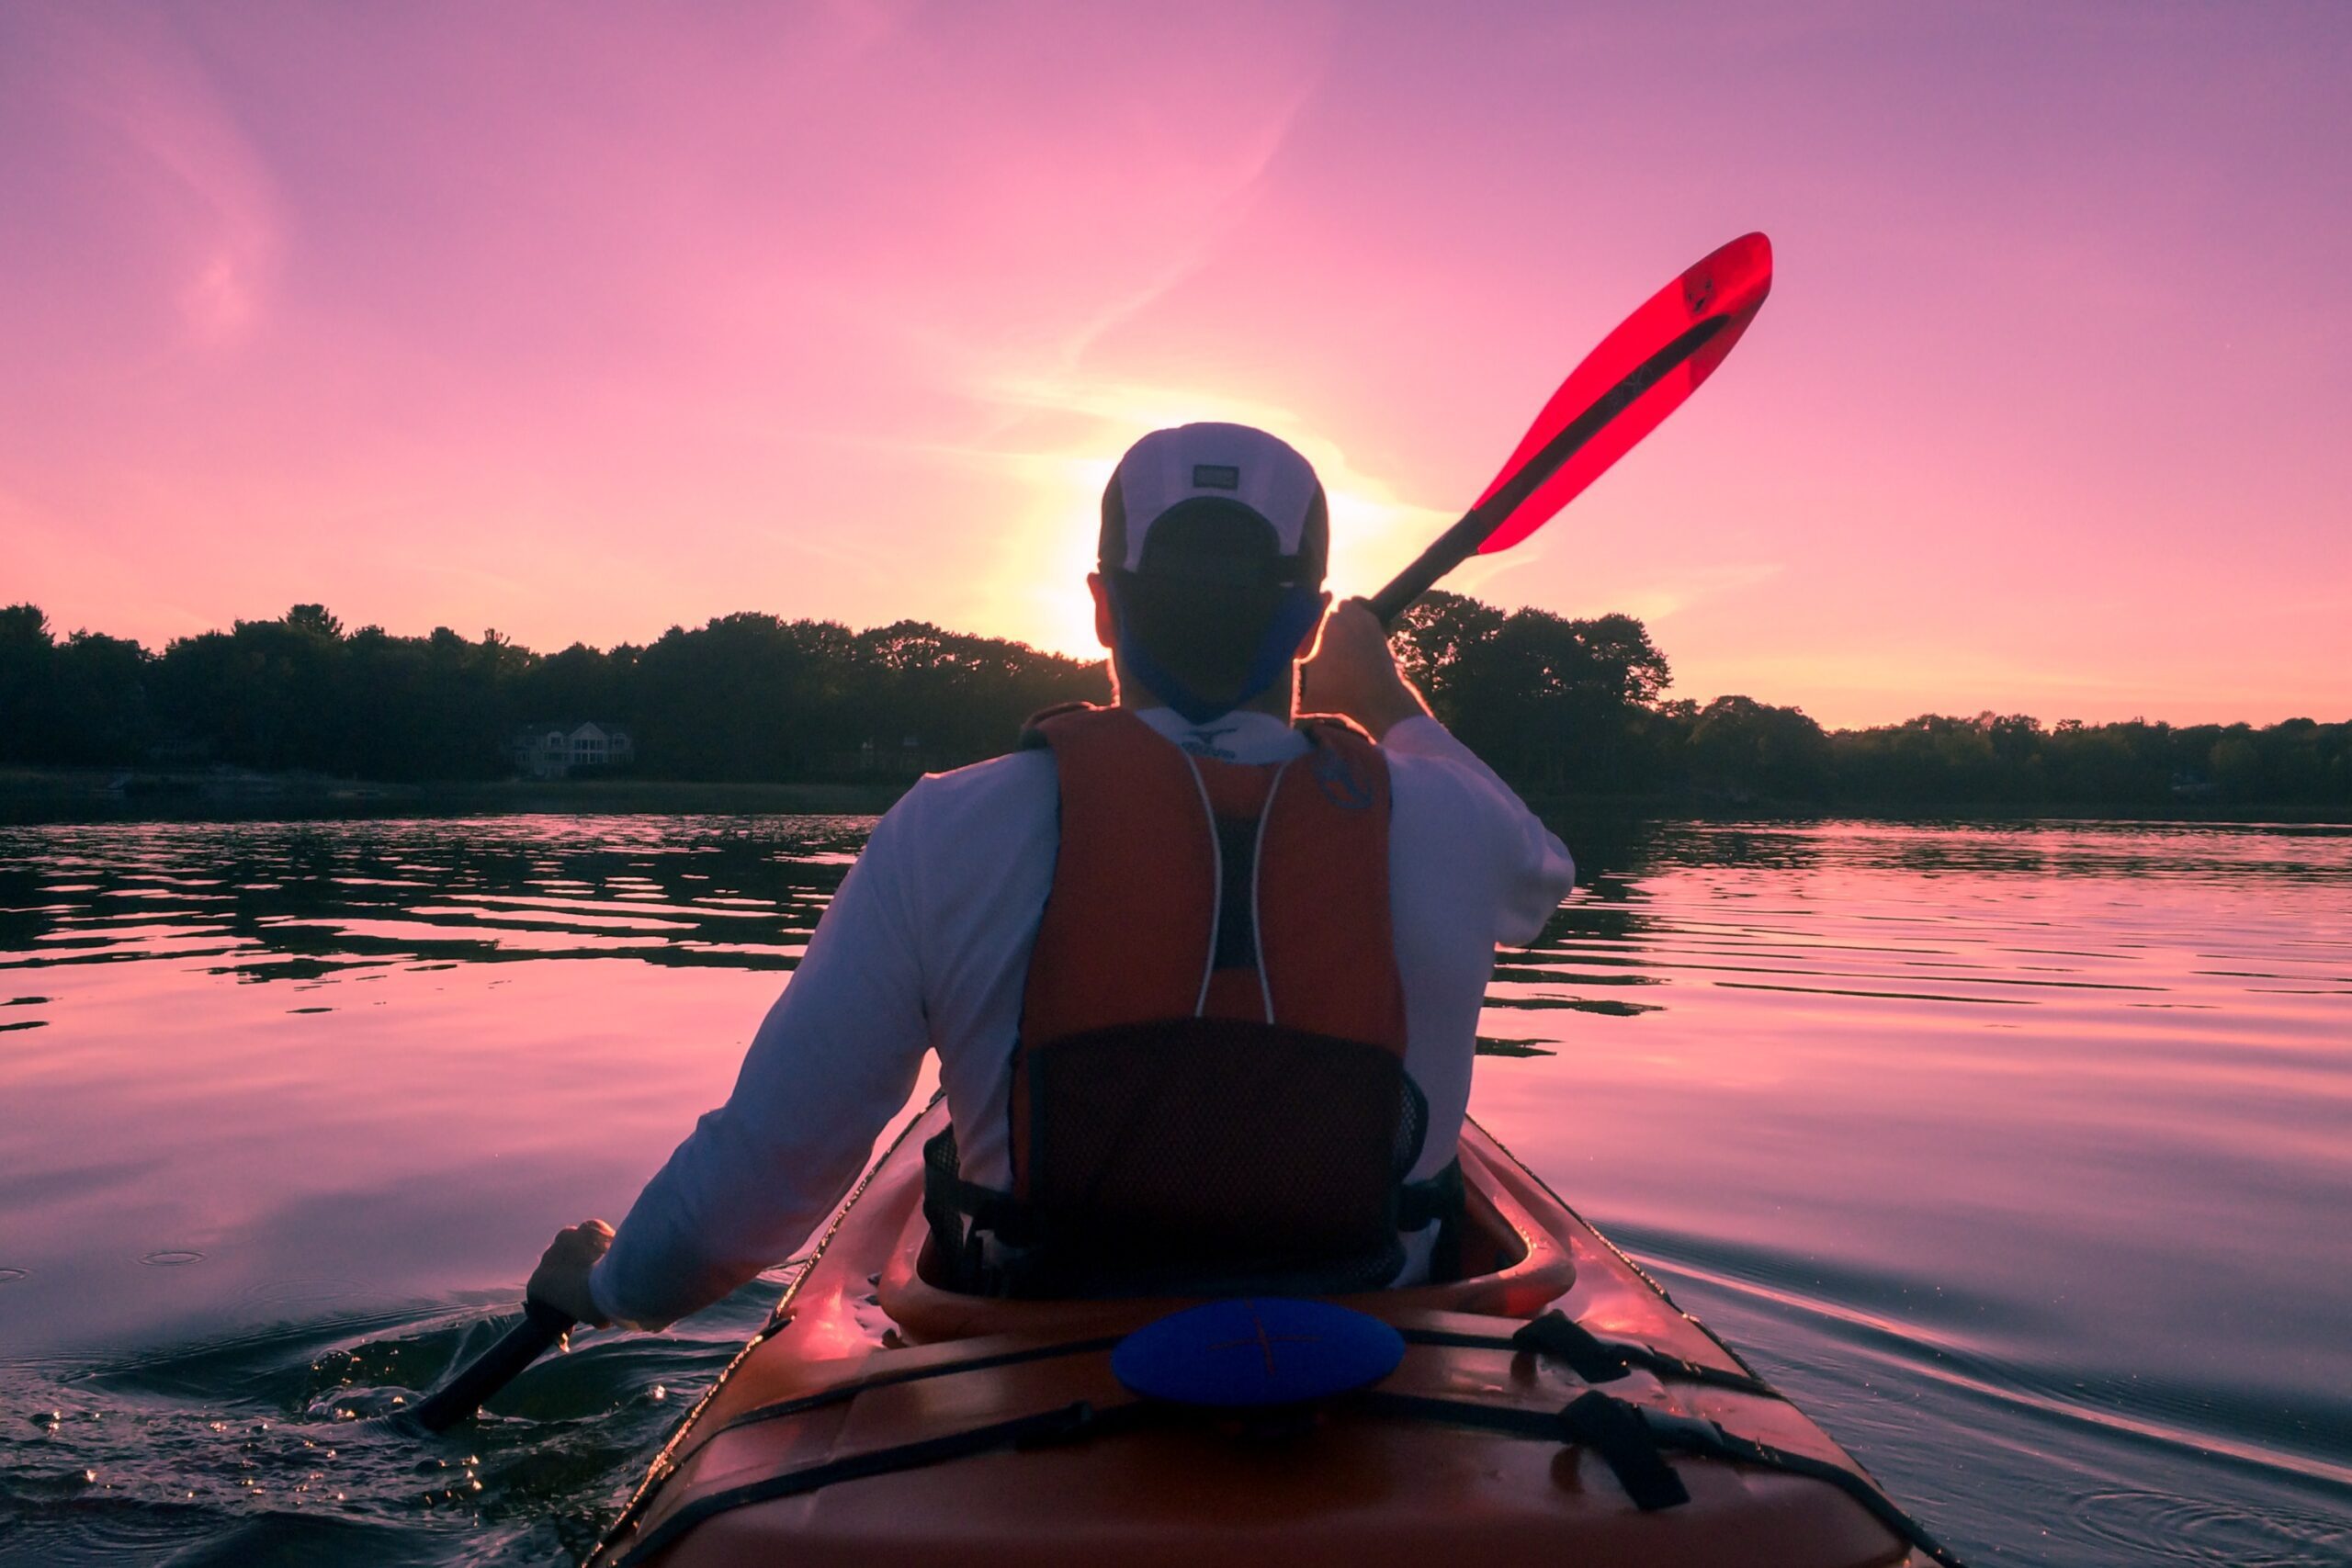 Man kayaking in a river with beautiful sky image, public domain CC0 photo.